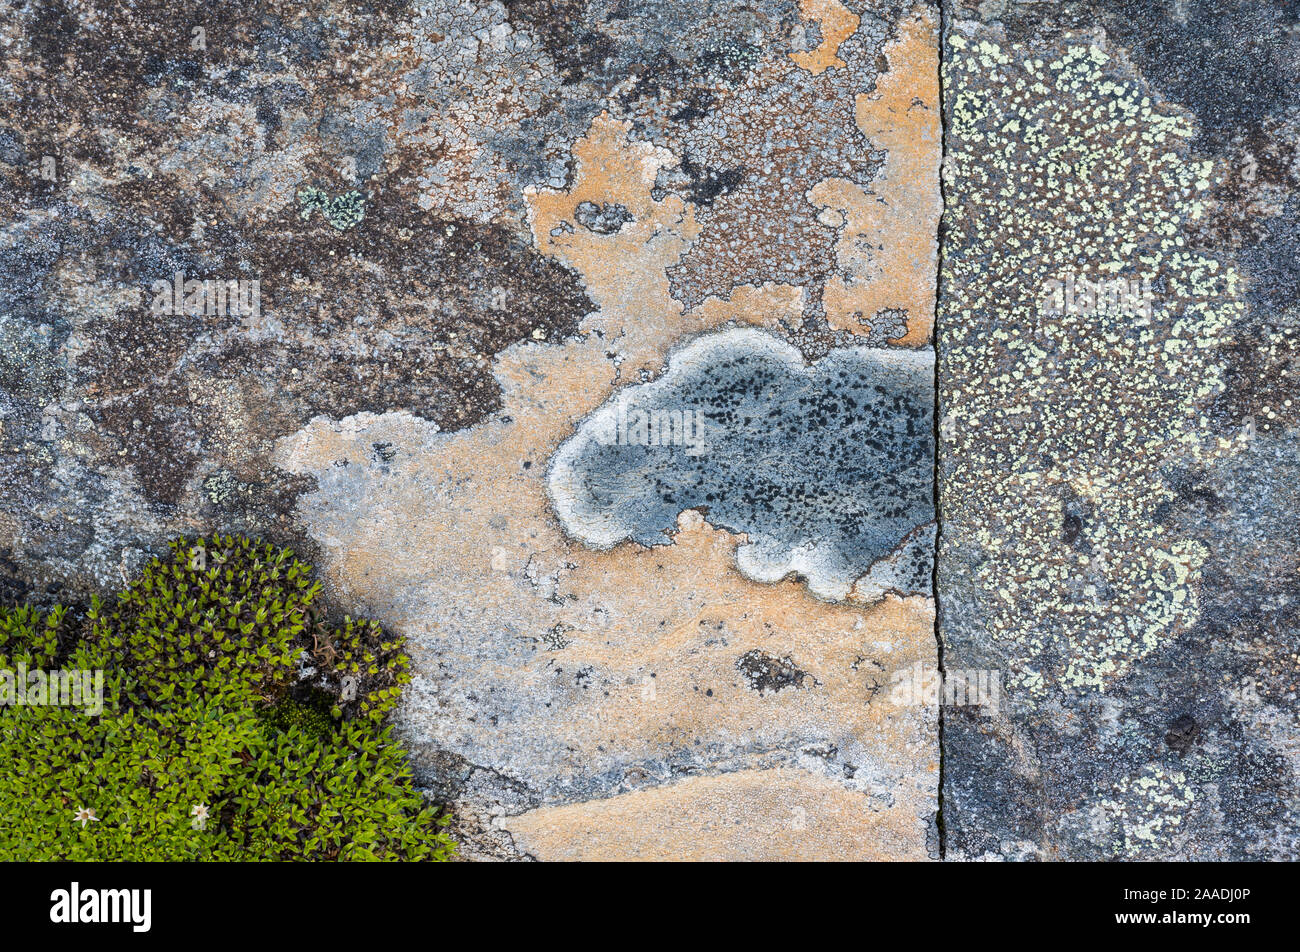 Crustose lichens (Lecanorales) on rocks in Swedish Padjelanta National Park, Laponia World Heritage Site, Sweden. August.  Highly commended in the GDT  European Wildlife Photographer of the Year  competition 2017 Stock Photo